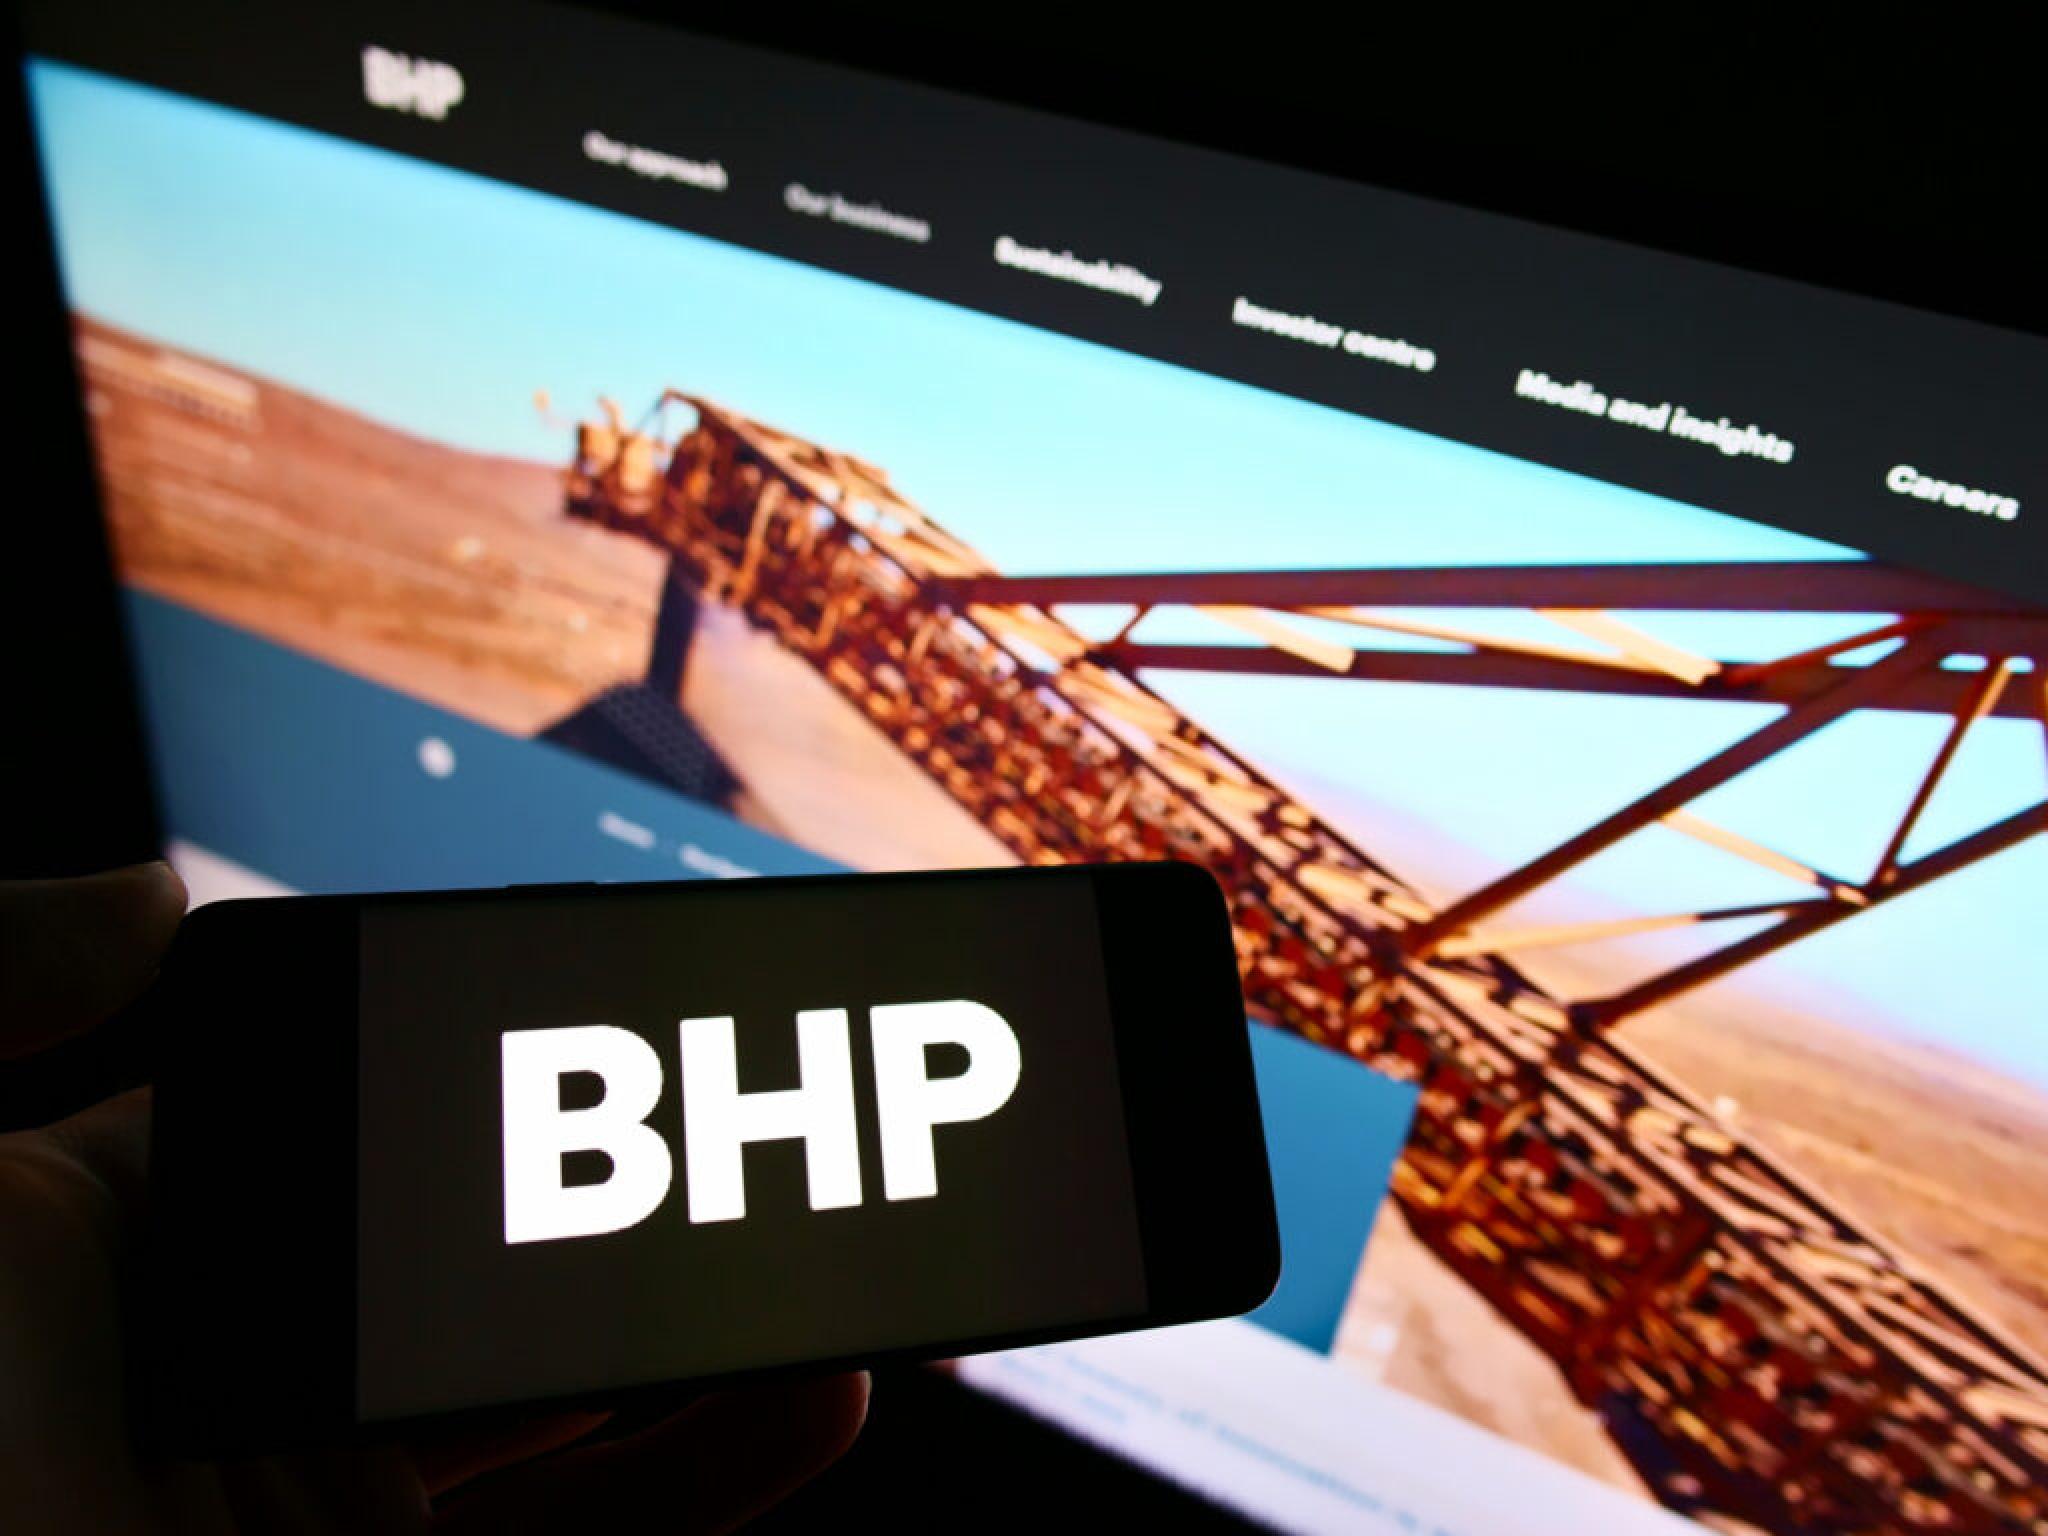  bhp-achieves-one-week-extension-after-launching-unsuccessful-third-bid-for-anglo-american 